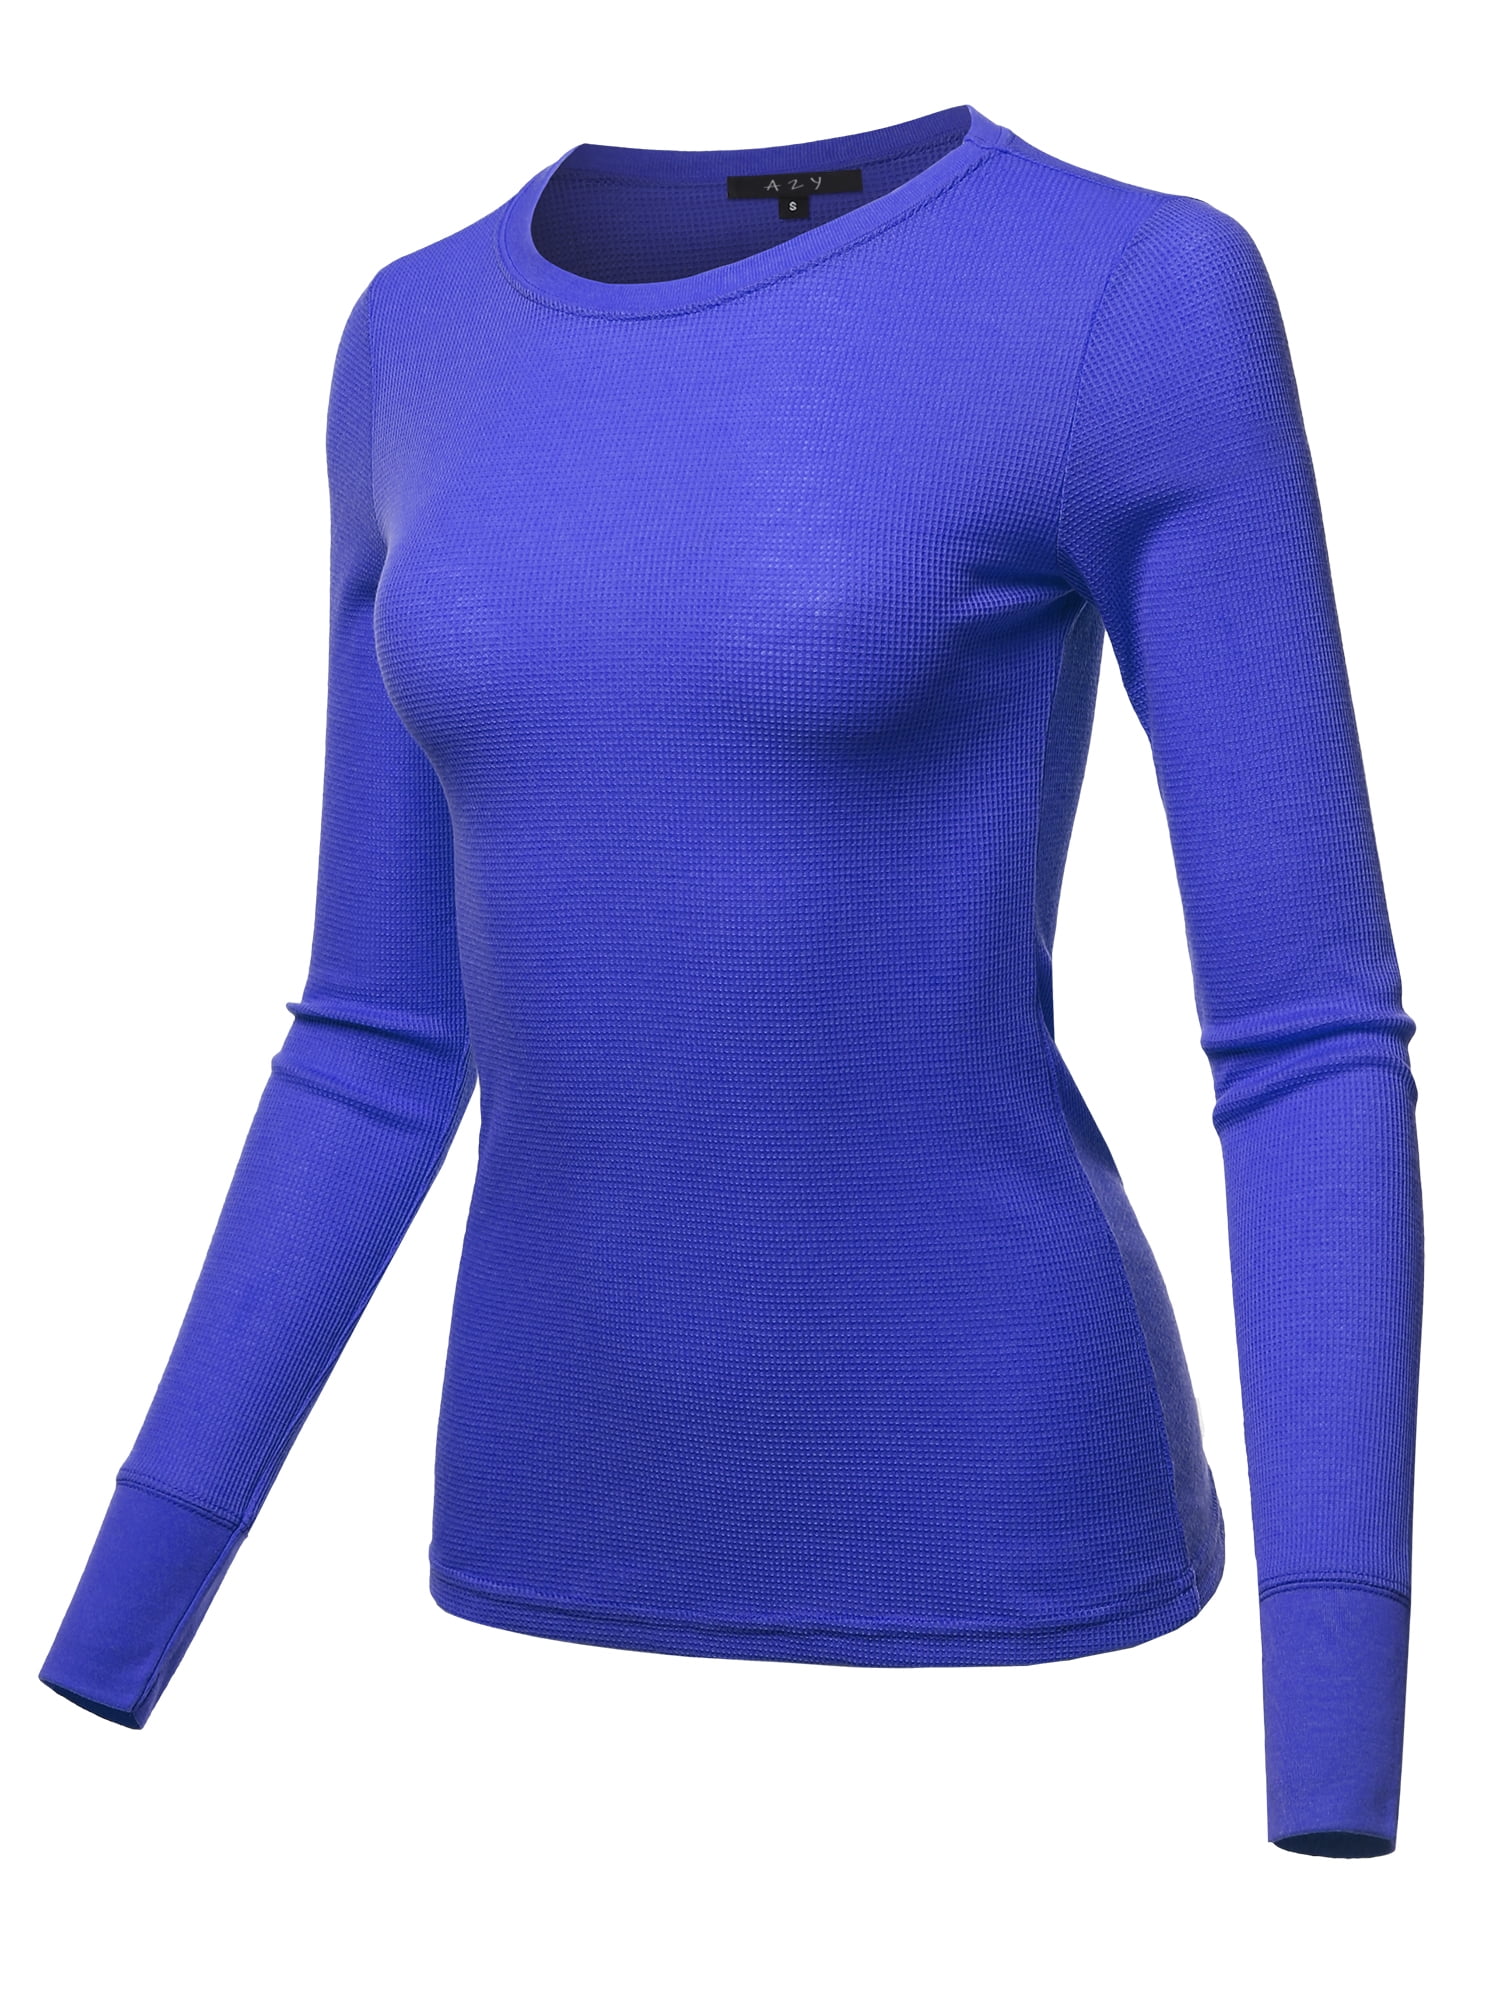 A2Y Women's Basic Solid Long Sleeve Crew Neck Fitted Thermal Top Shirt ...